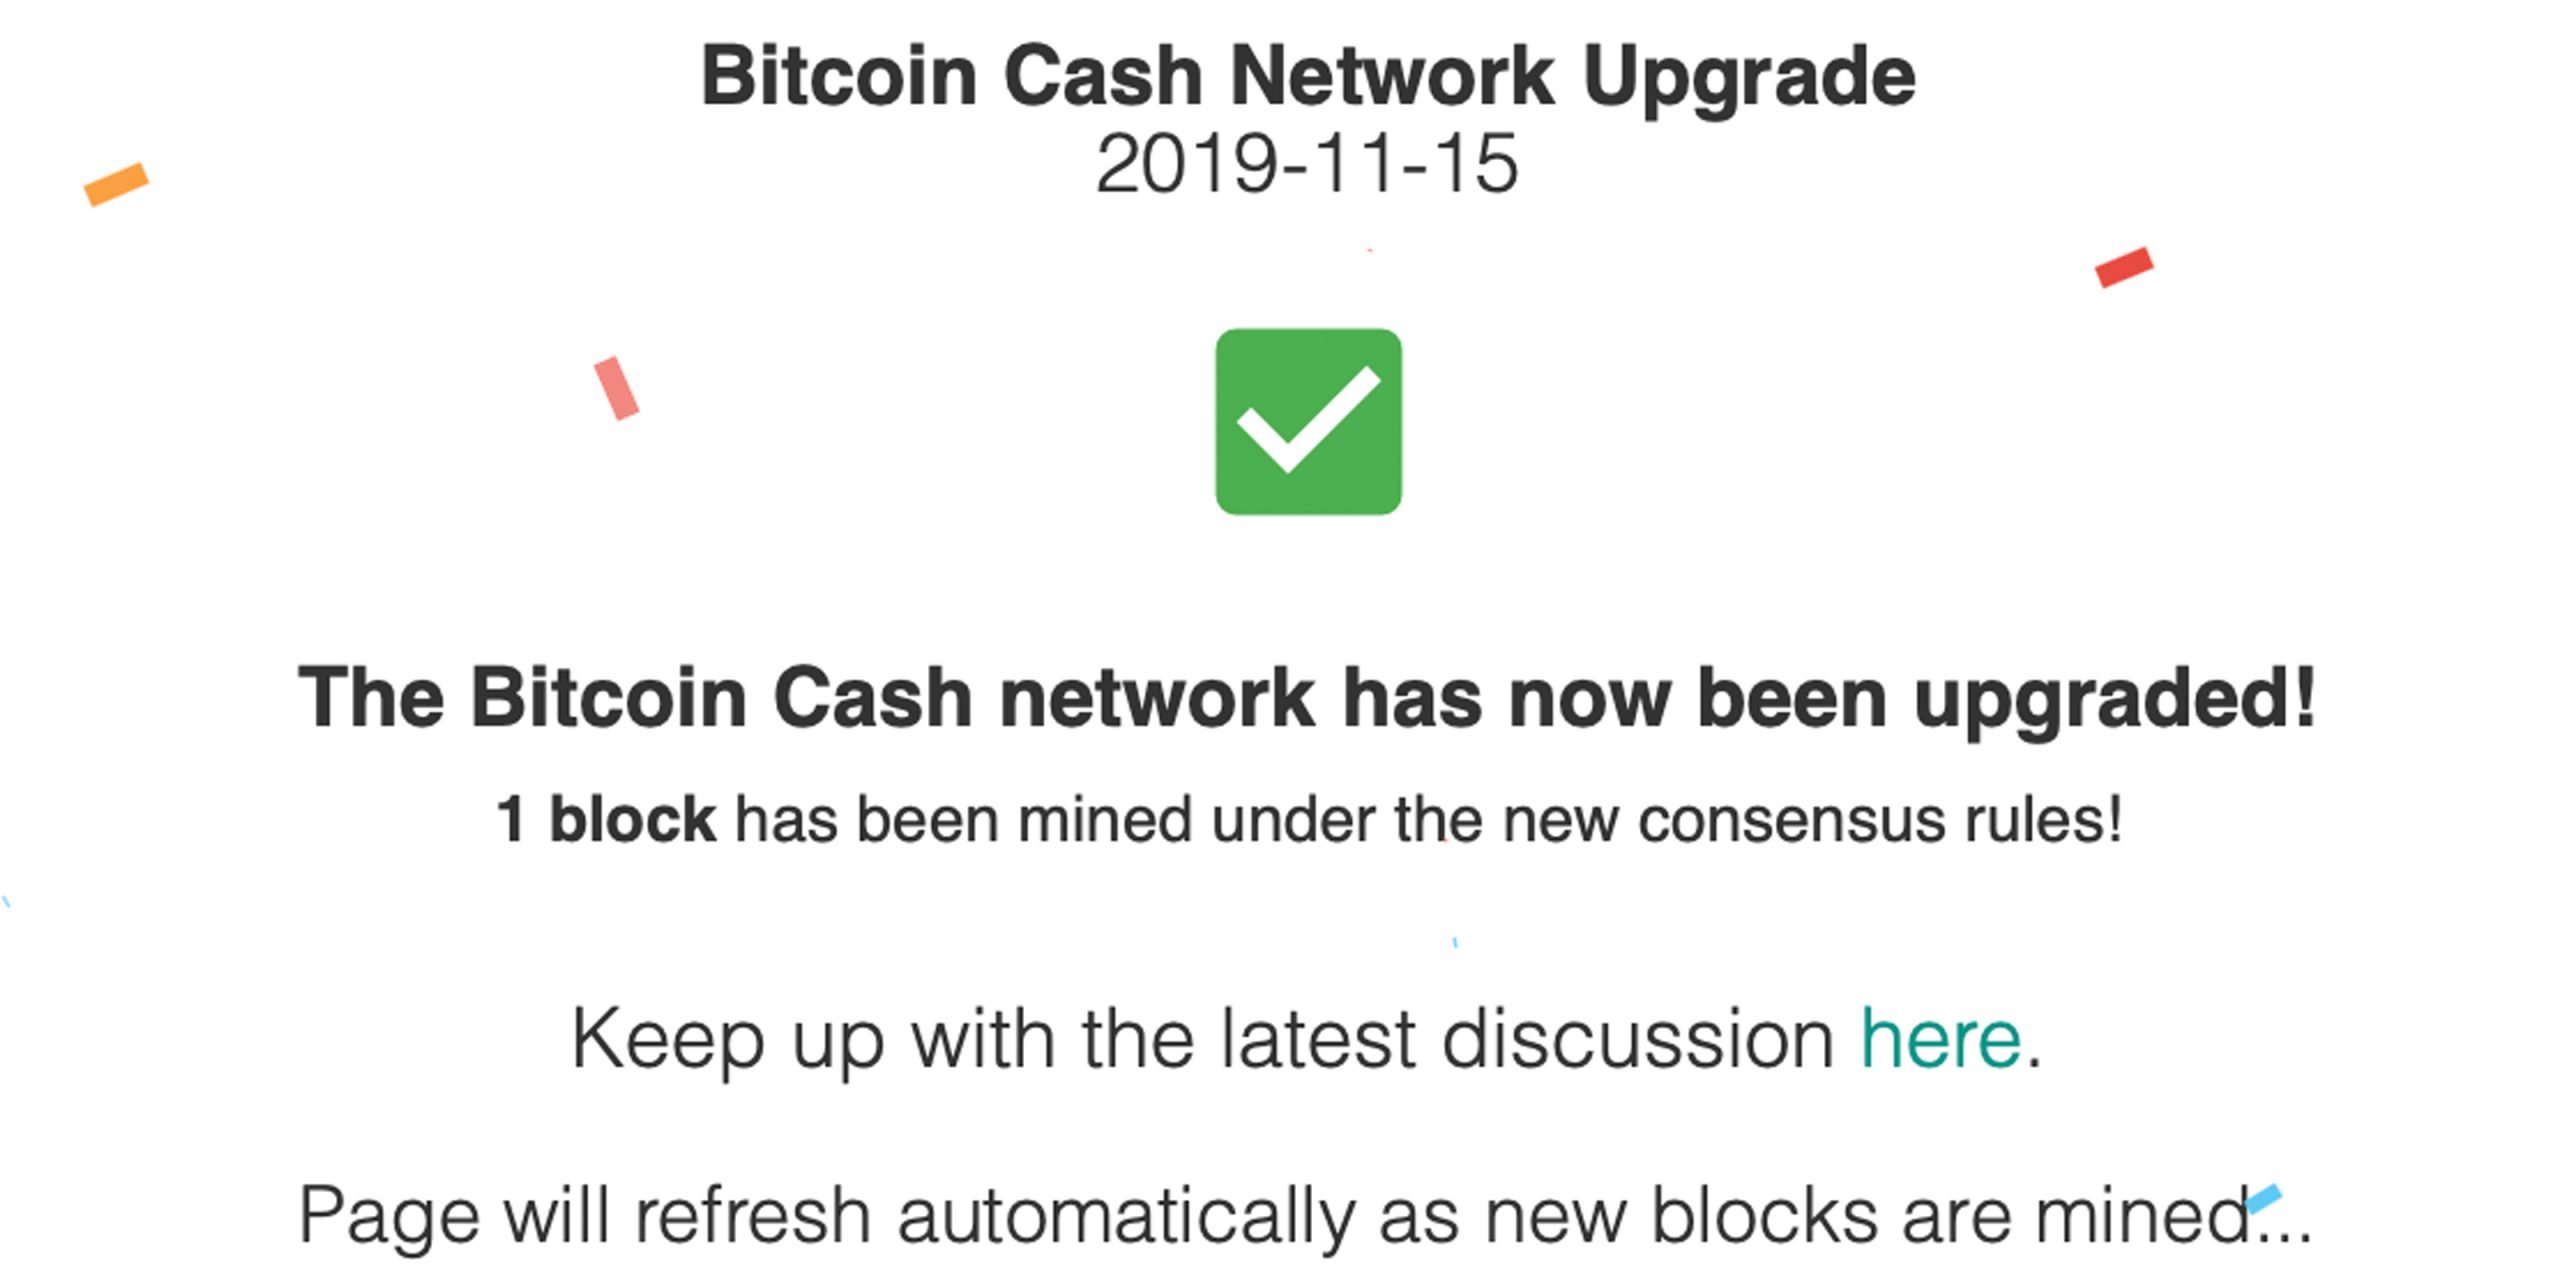 Bitcoin Cash Upgrade Complete: 2 New Protocol Changes Added